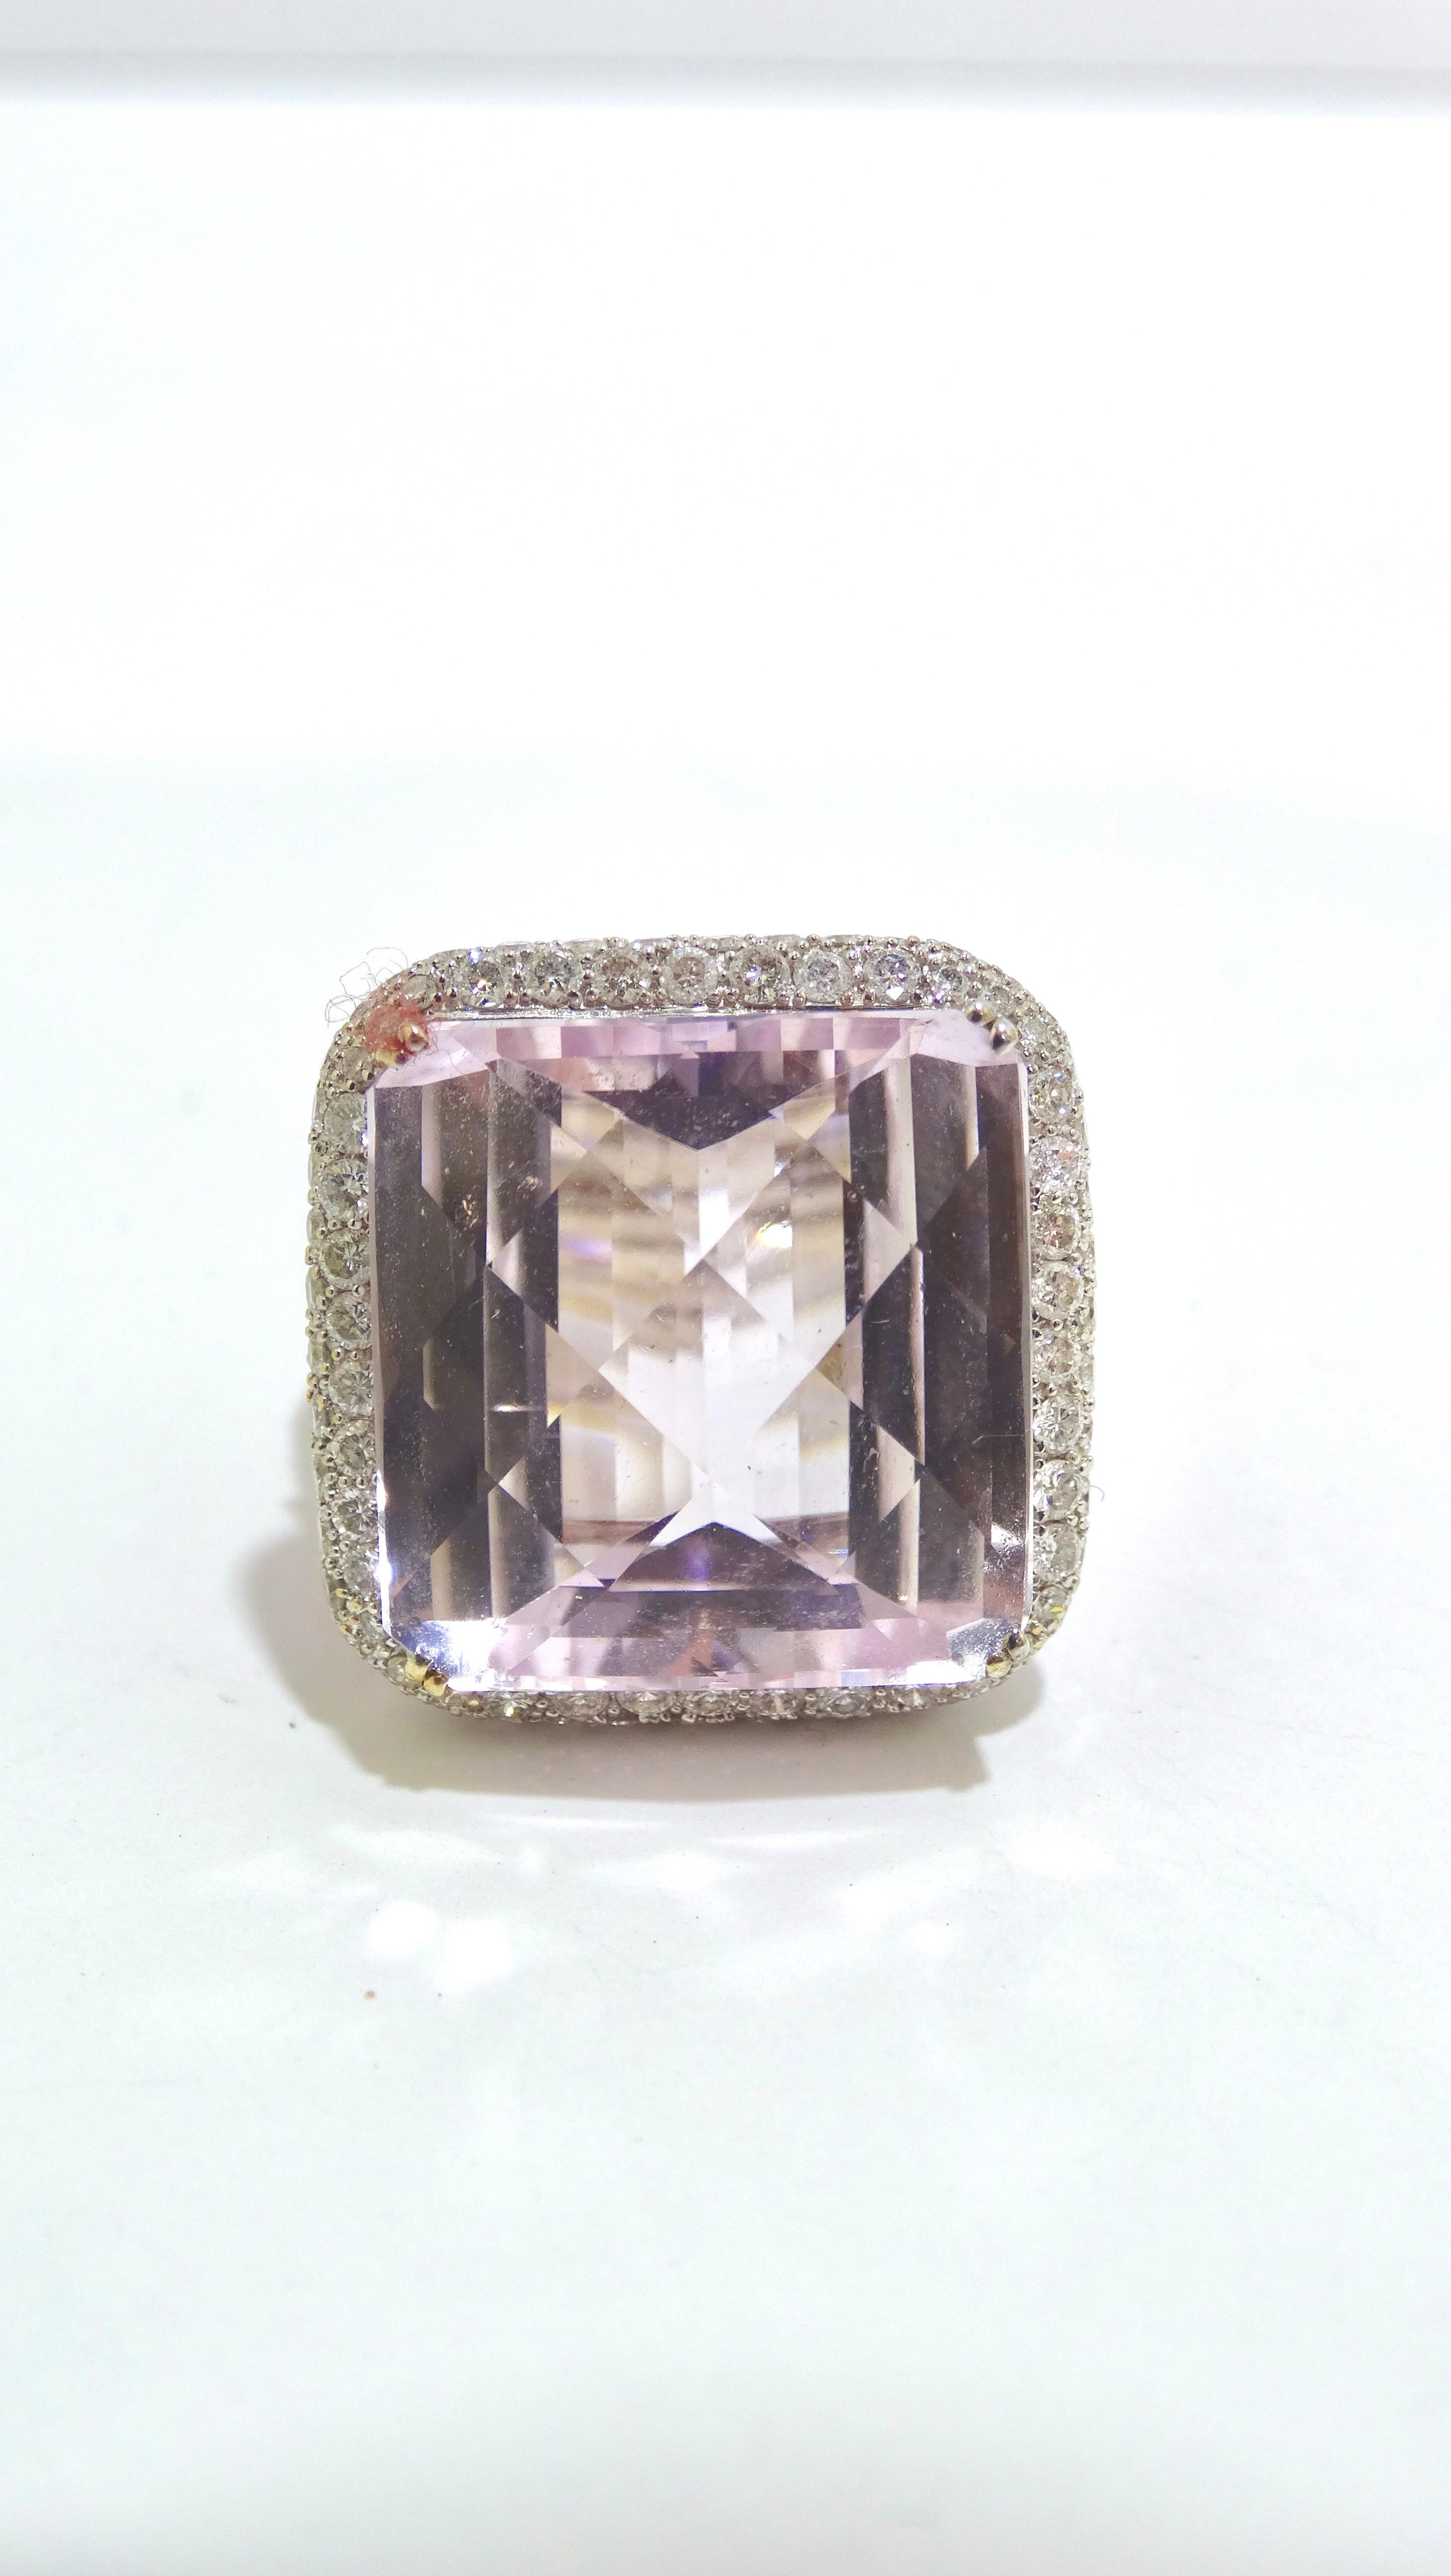 This ring is jaw-dropping. You will not feel anything short of glamorous if you add this ring to your collection. A huge and magnificent special-cut 25ct Kunzite stone is placed in the centre along with 
1.6 ct diamonds surrounding the stone and